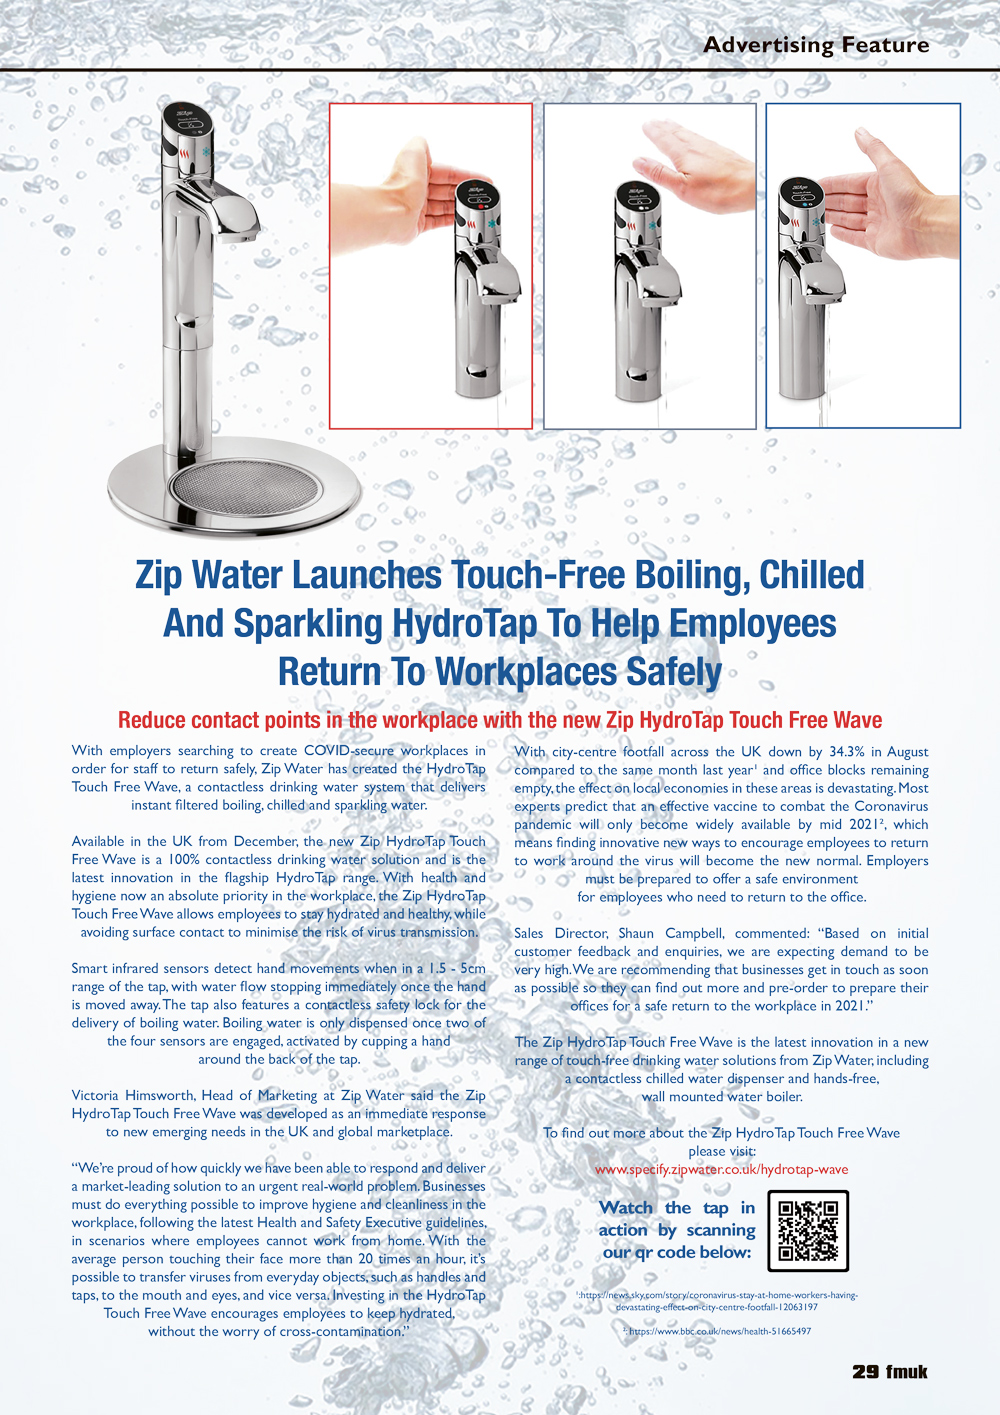 Zip Water Launches Touch-Free Boiling, Chilled And Sparkling HydroTap To Help Employees Return To Workplaces Safely